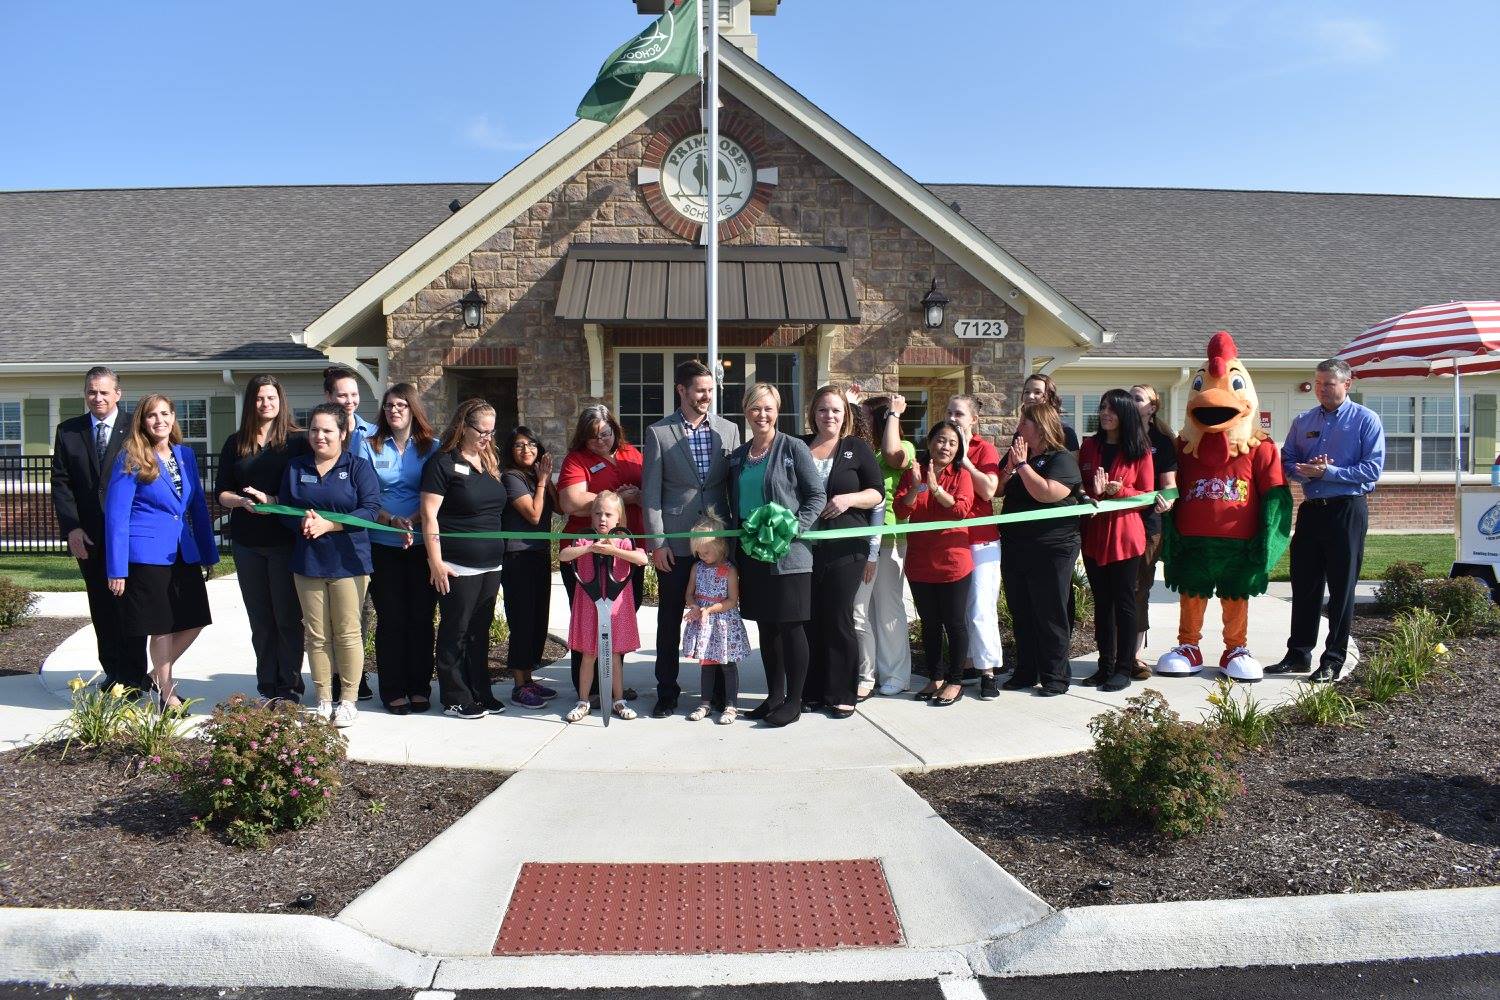 The Churchills celebrated the grand opening of Primrose School of Perrysburg last year as one of 33 new Primrose schools to be opened in 2017.